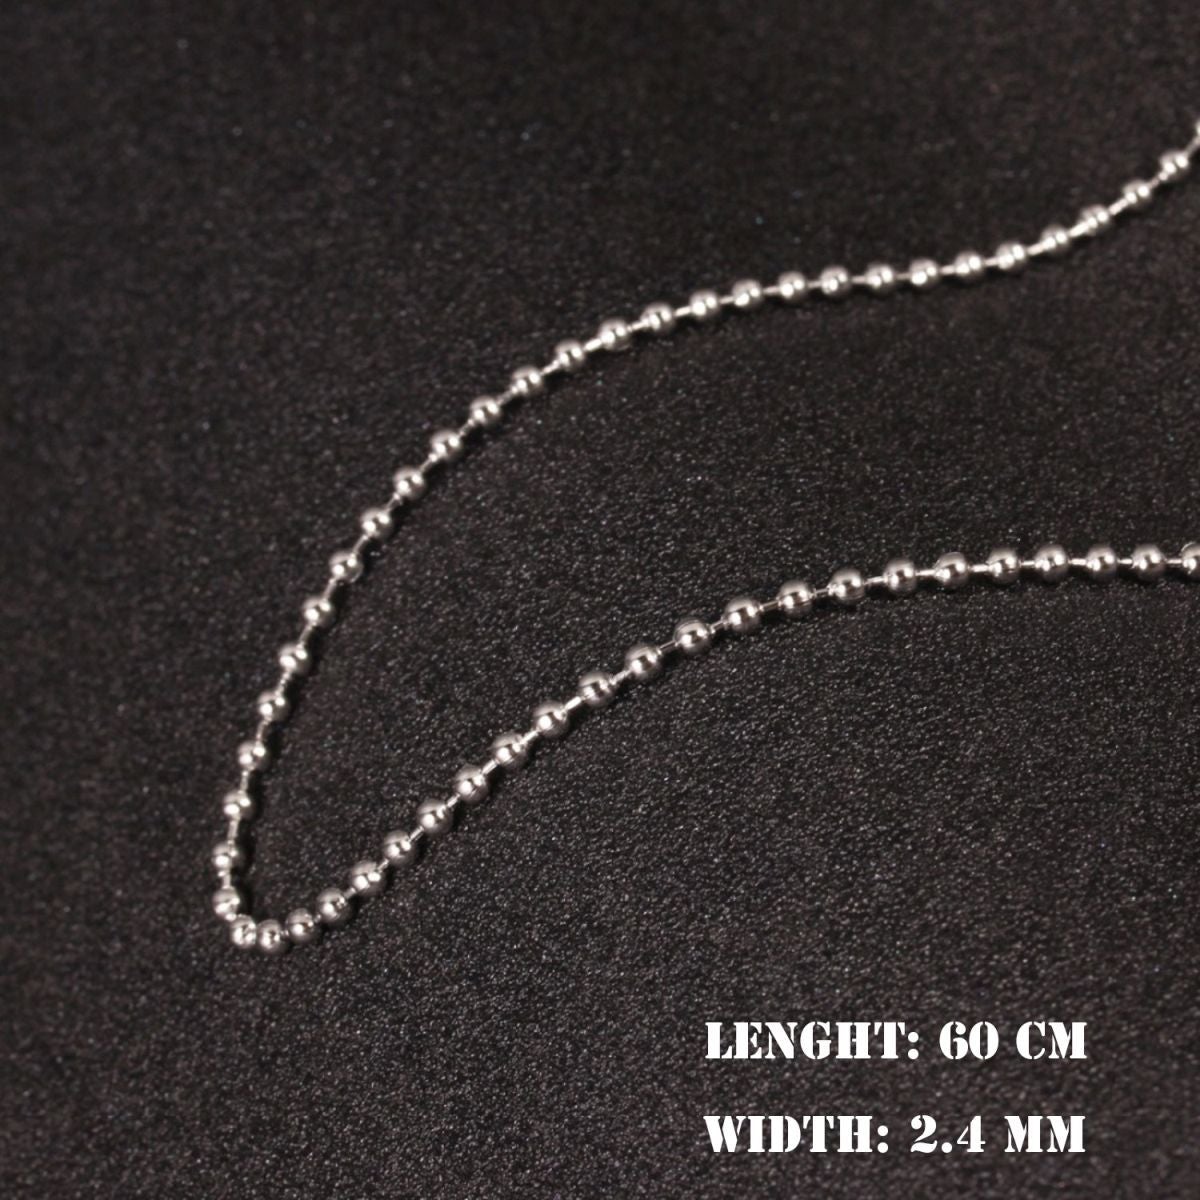 Ball Silver 316L Stainless Steel Long Necklace Chain 21" Men Women